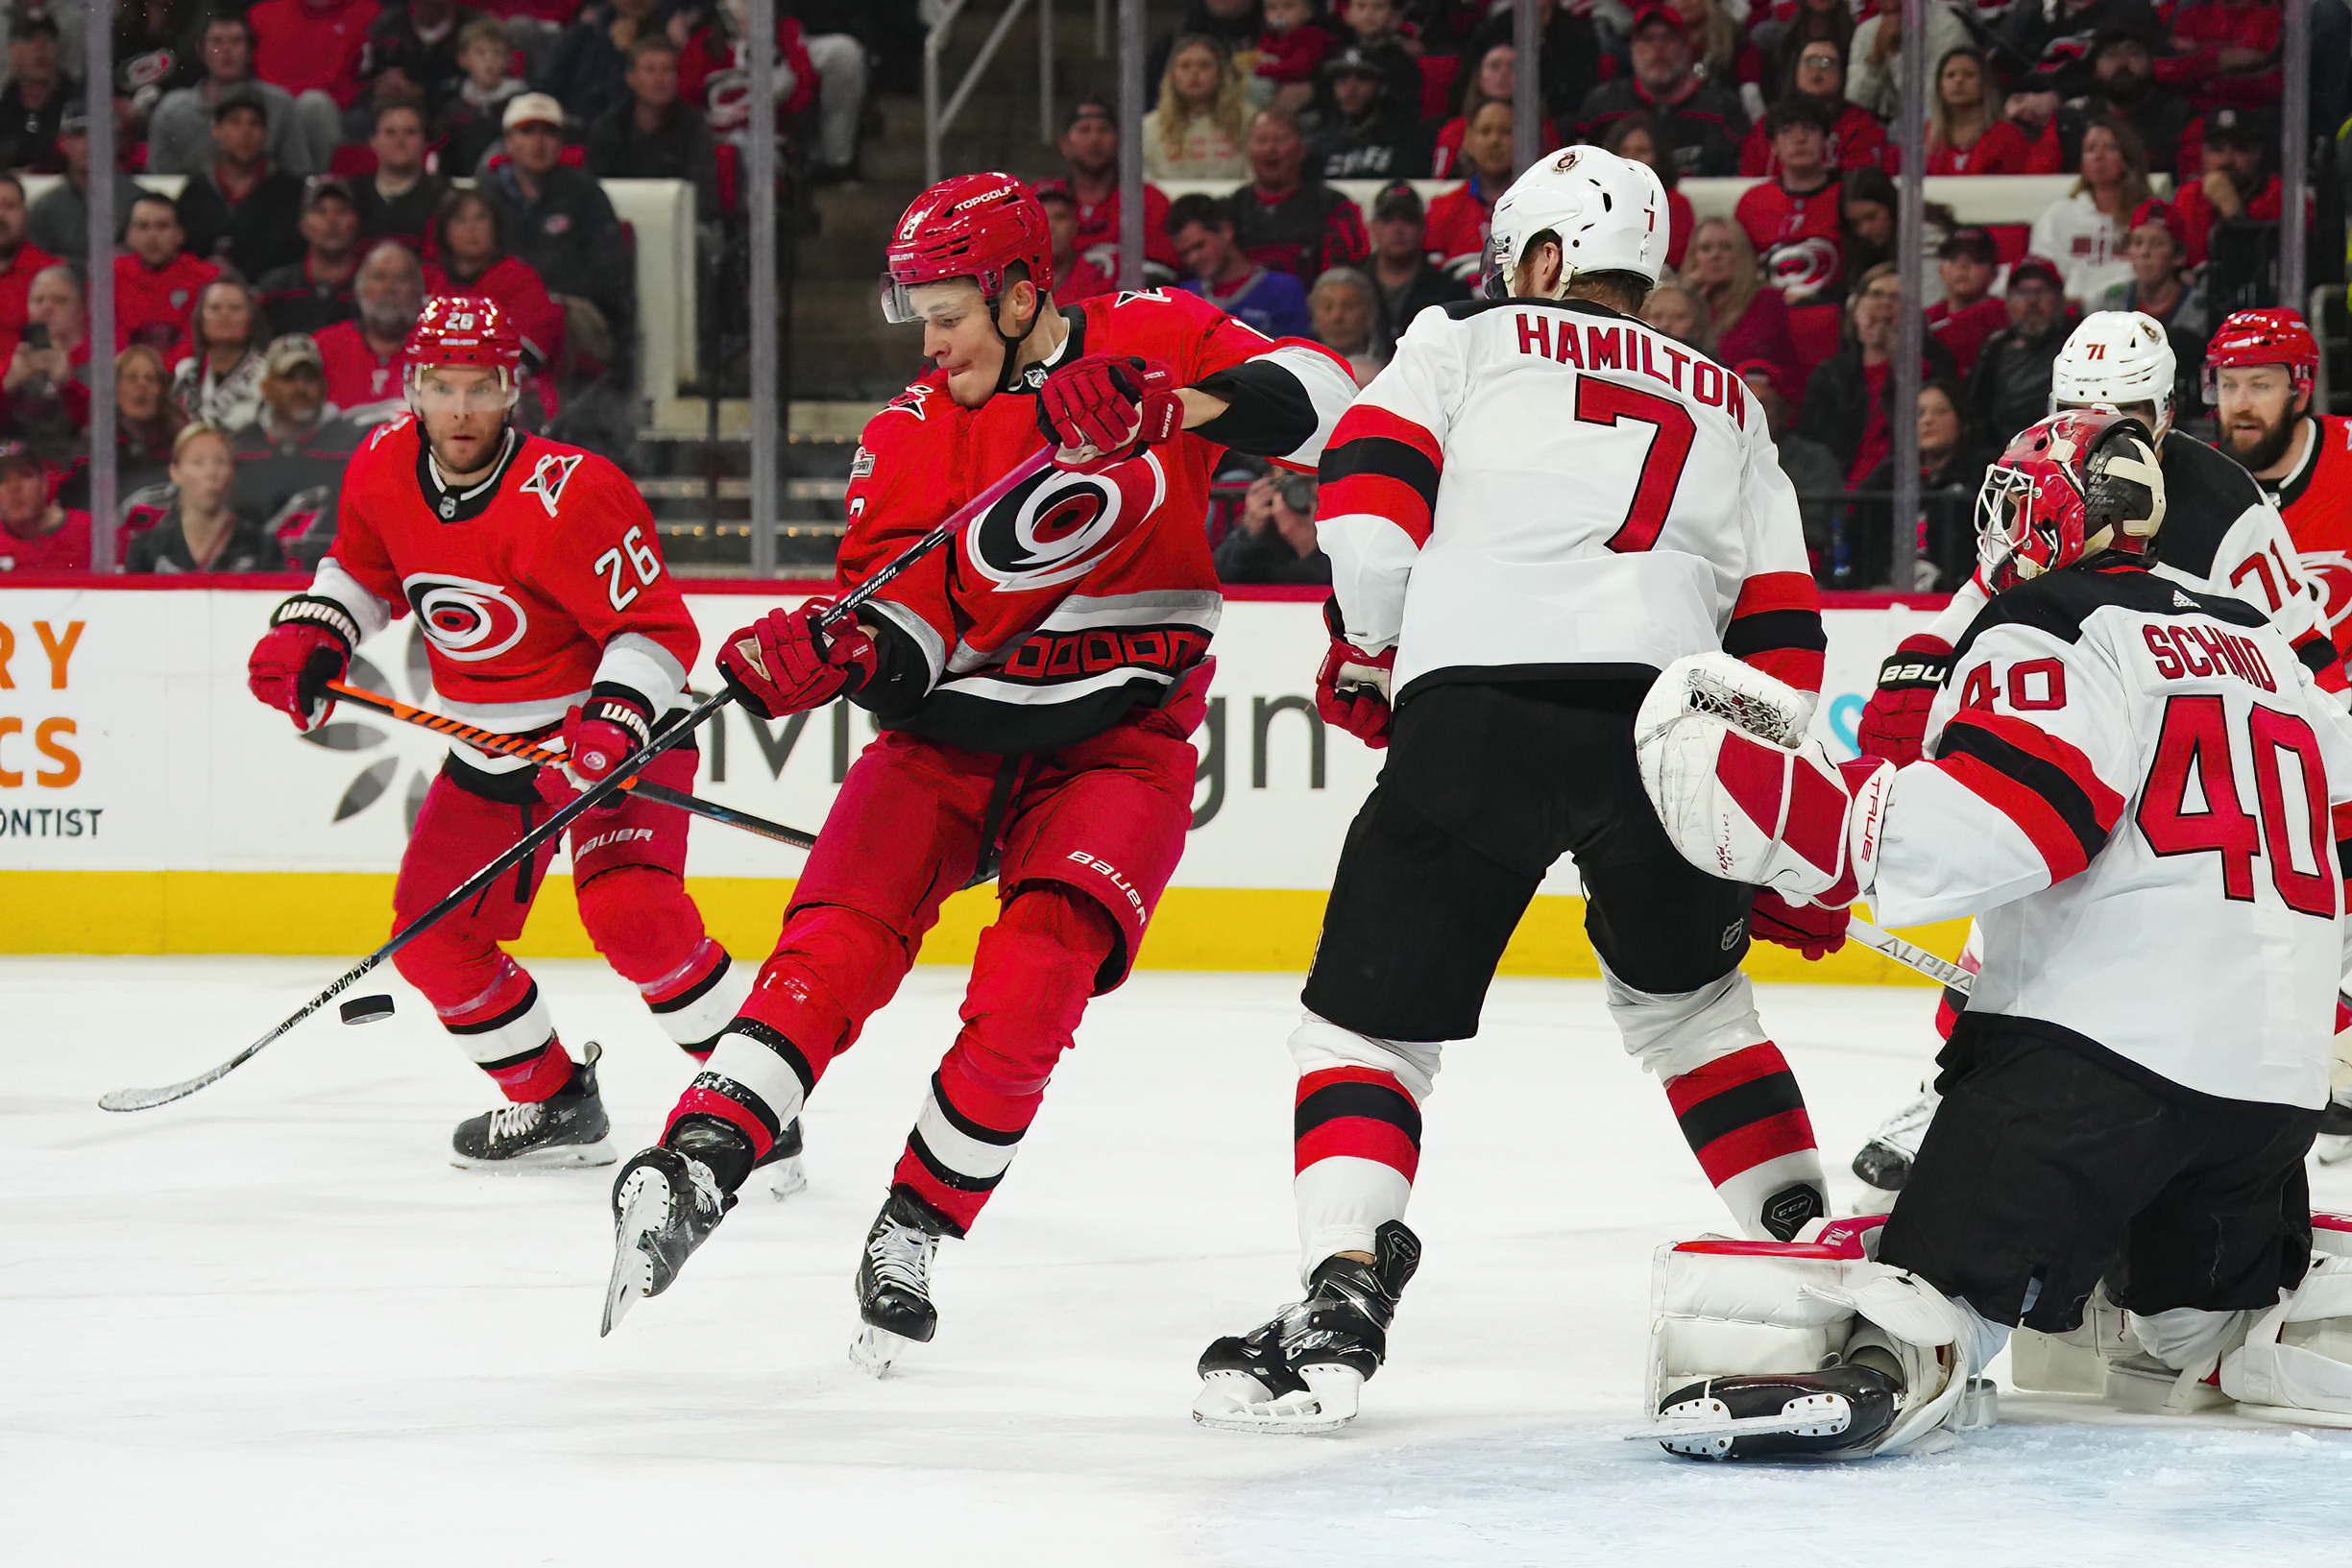 First-minute goal propels surging Hurricanes past Devils - The